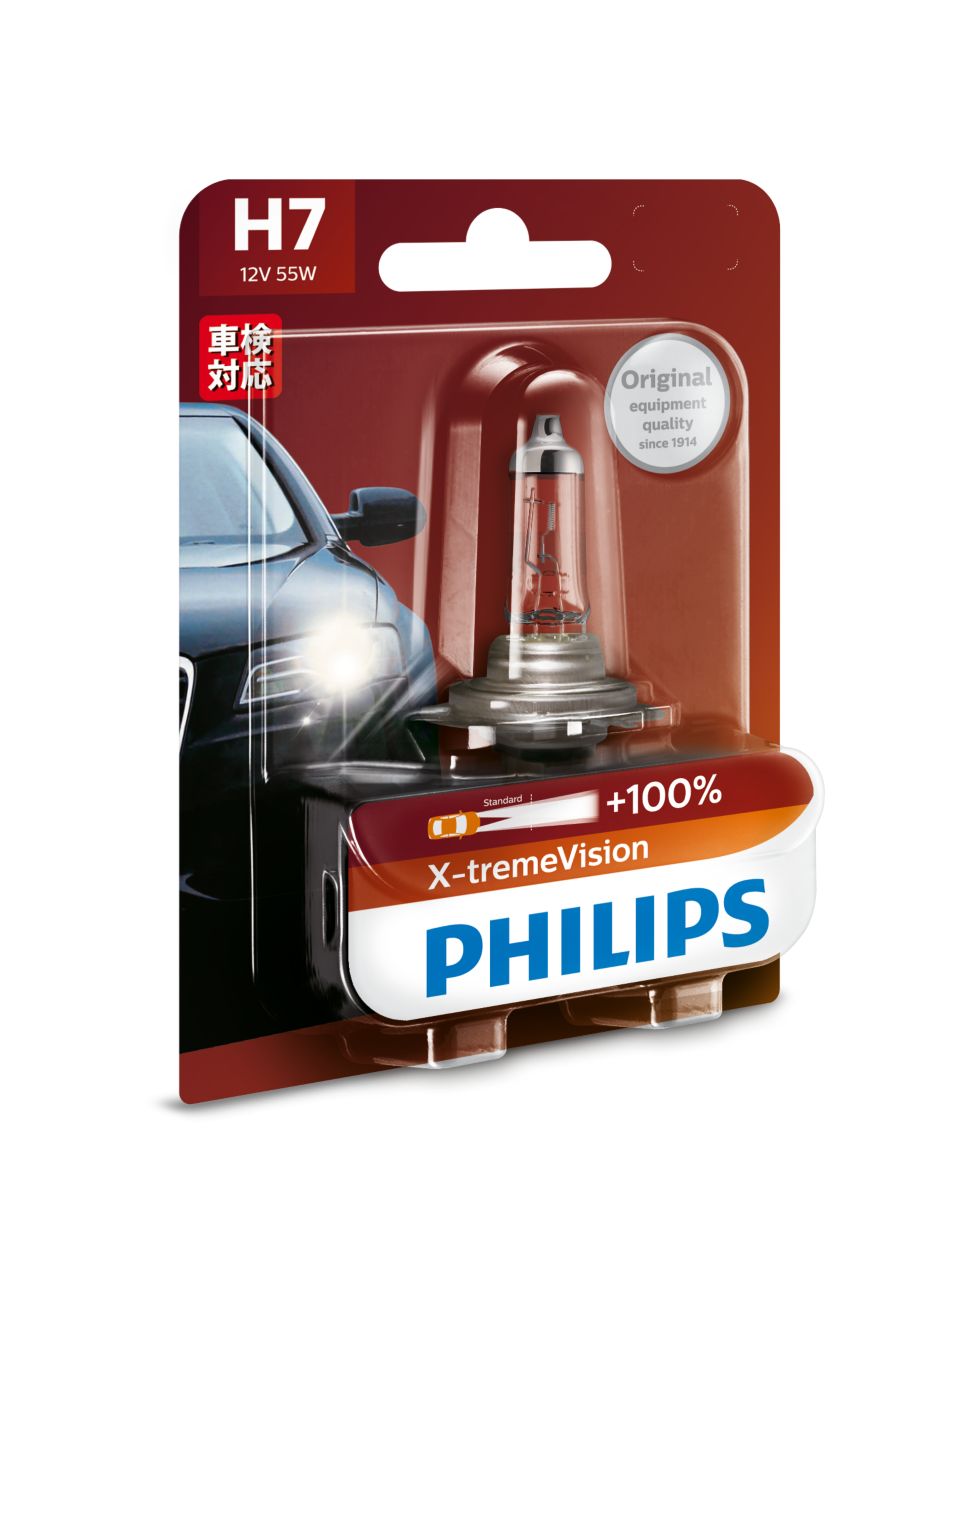 PHILIPS 12972XVP H7 Xtreme Vision Plus Lamp (12V,55W,Set of 2) Car Fancy  Lights Price in India - Buy PHILIPS 12972XVP H7 Xtreme Vision Plus Lamp  (12V,55W,Set of 2) Car Fancy Lights online